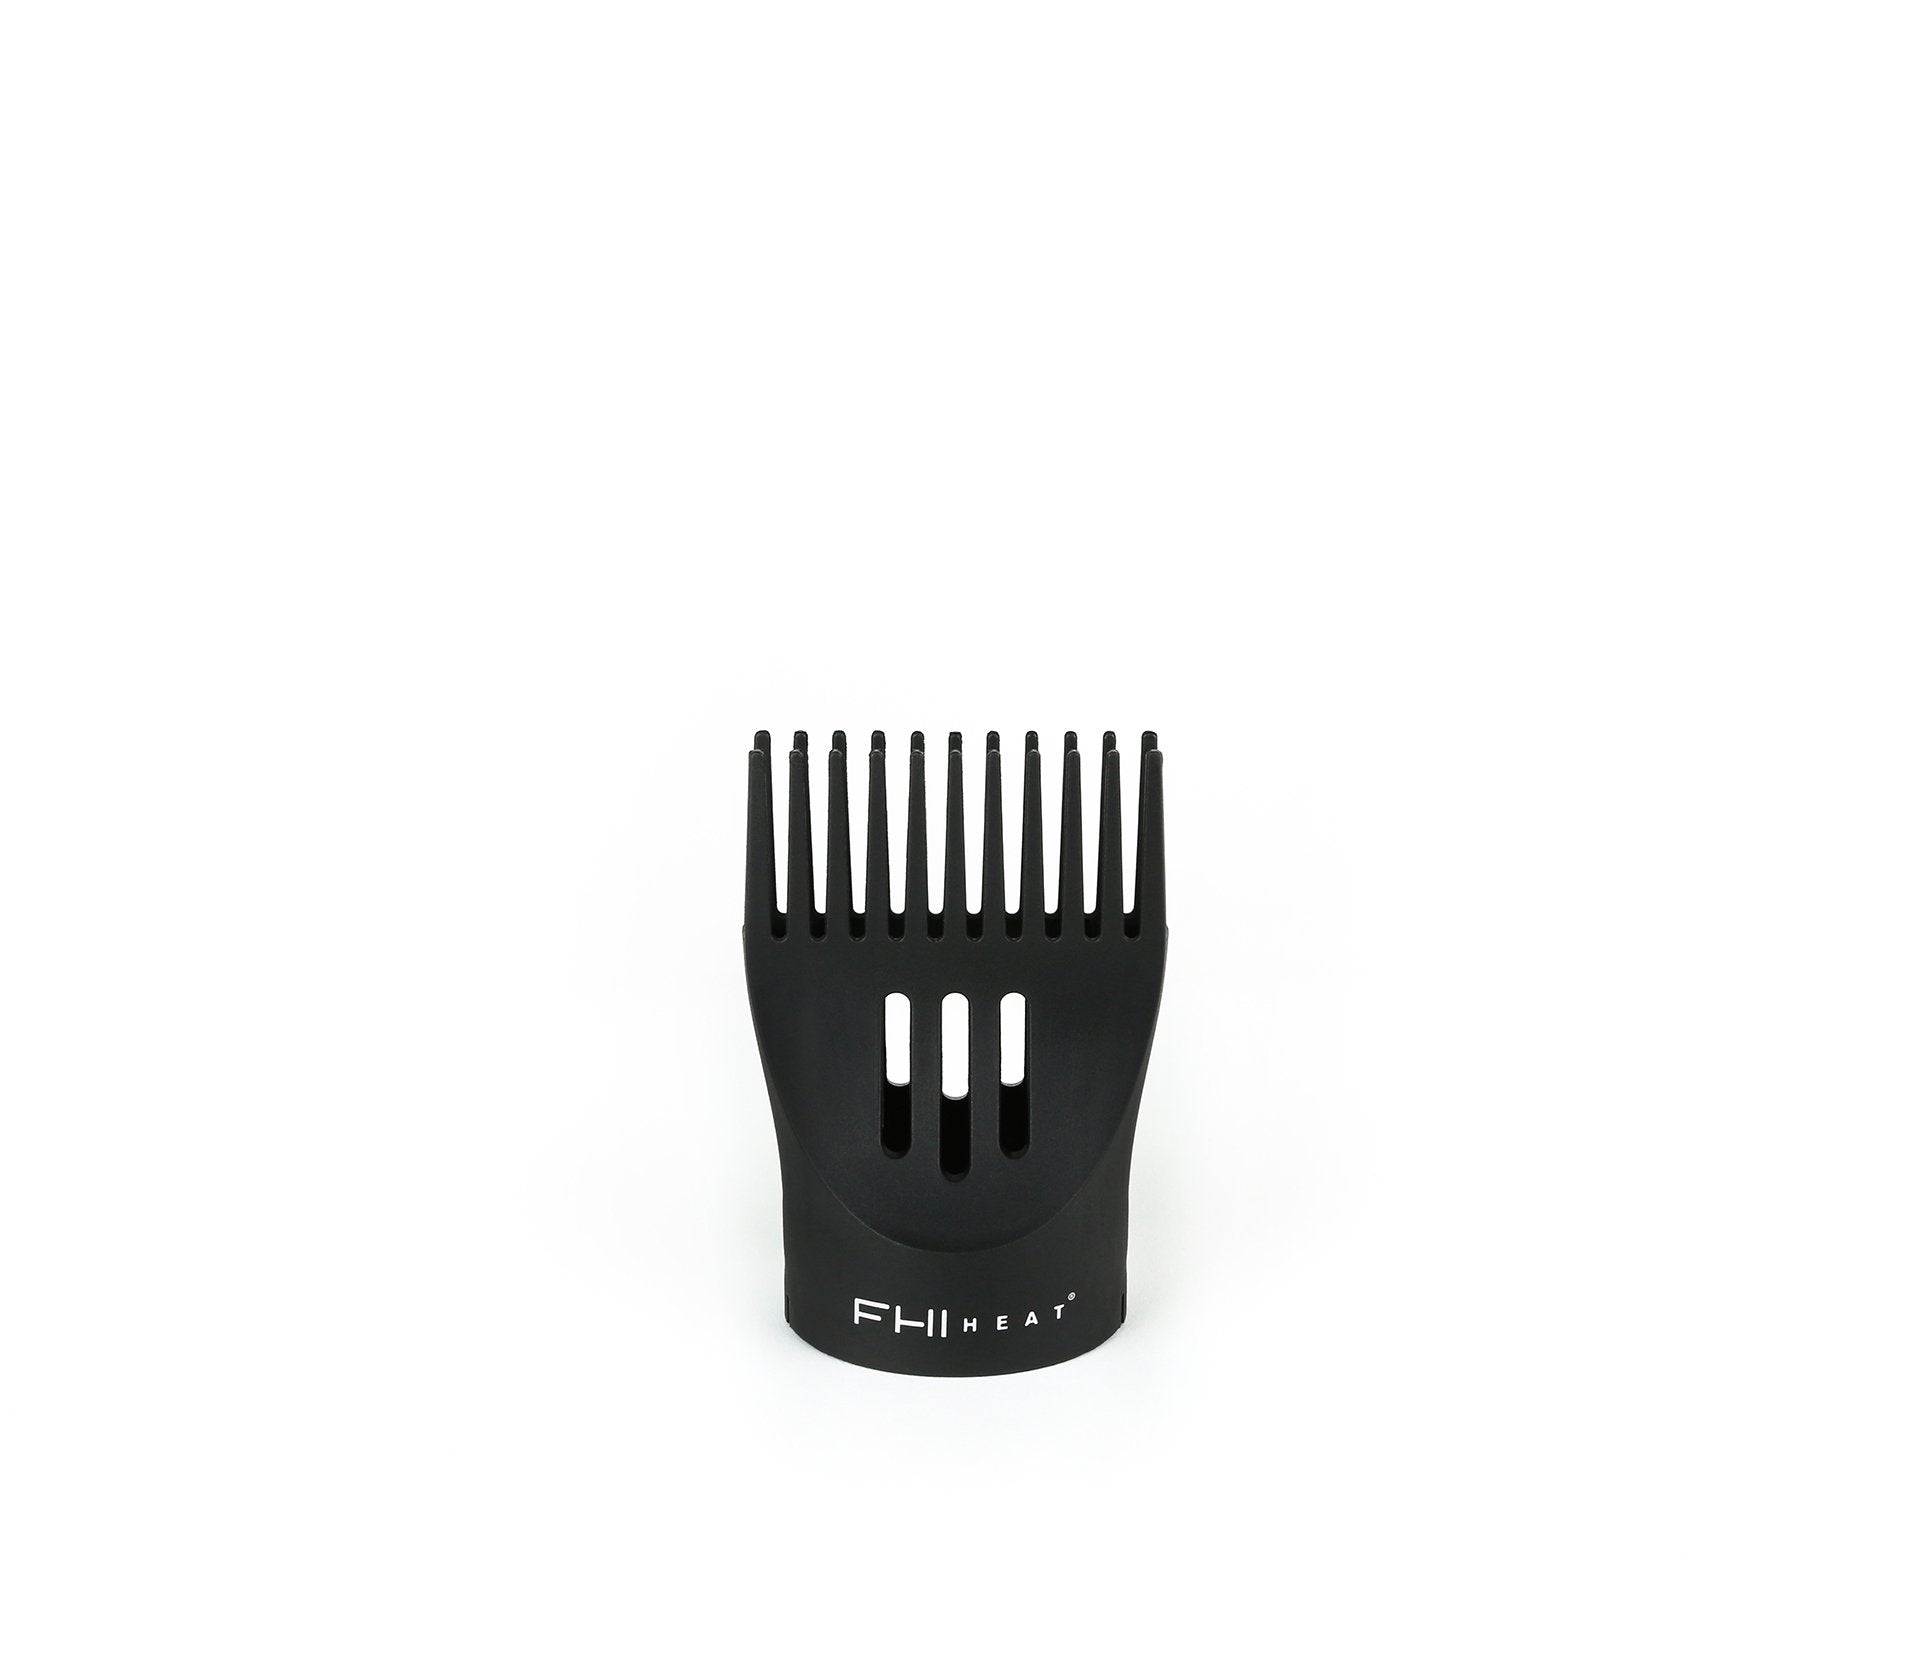 Buy Segbeauty Comb Attachment for Hair Dryer Segbeauty Blow Dryer Pik  Concentrator Nozzle Brush Attachments Hairdressing Styling Salon Tool for  Straightening Detangling Fine Wavy Curly Natural Hair Online at Low  Prices in India  Amazonin